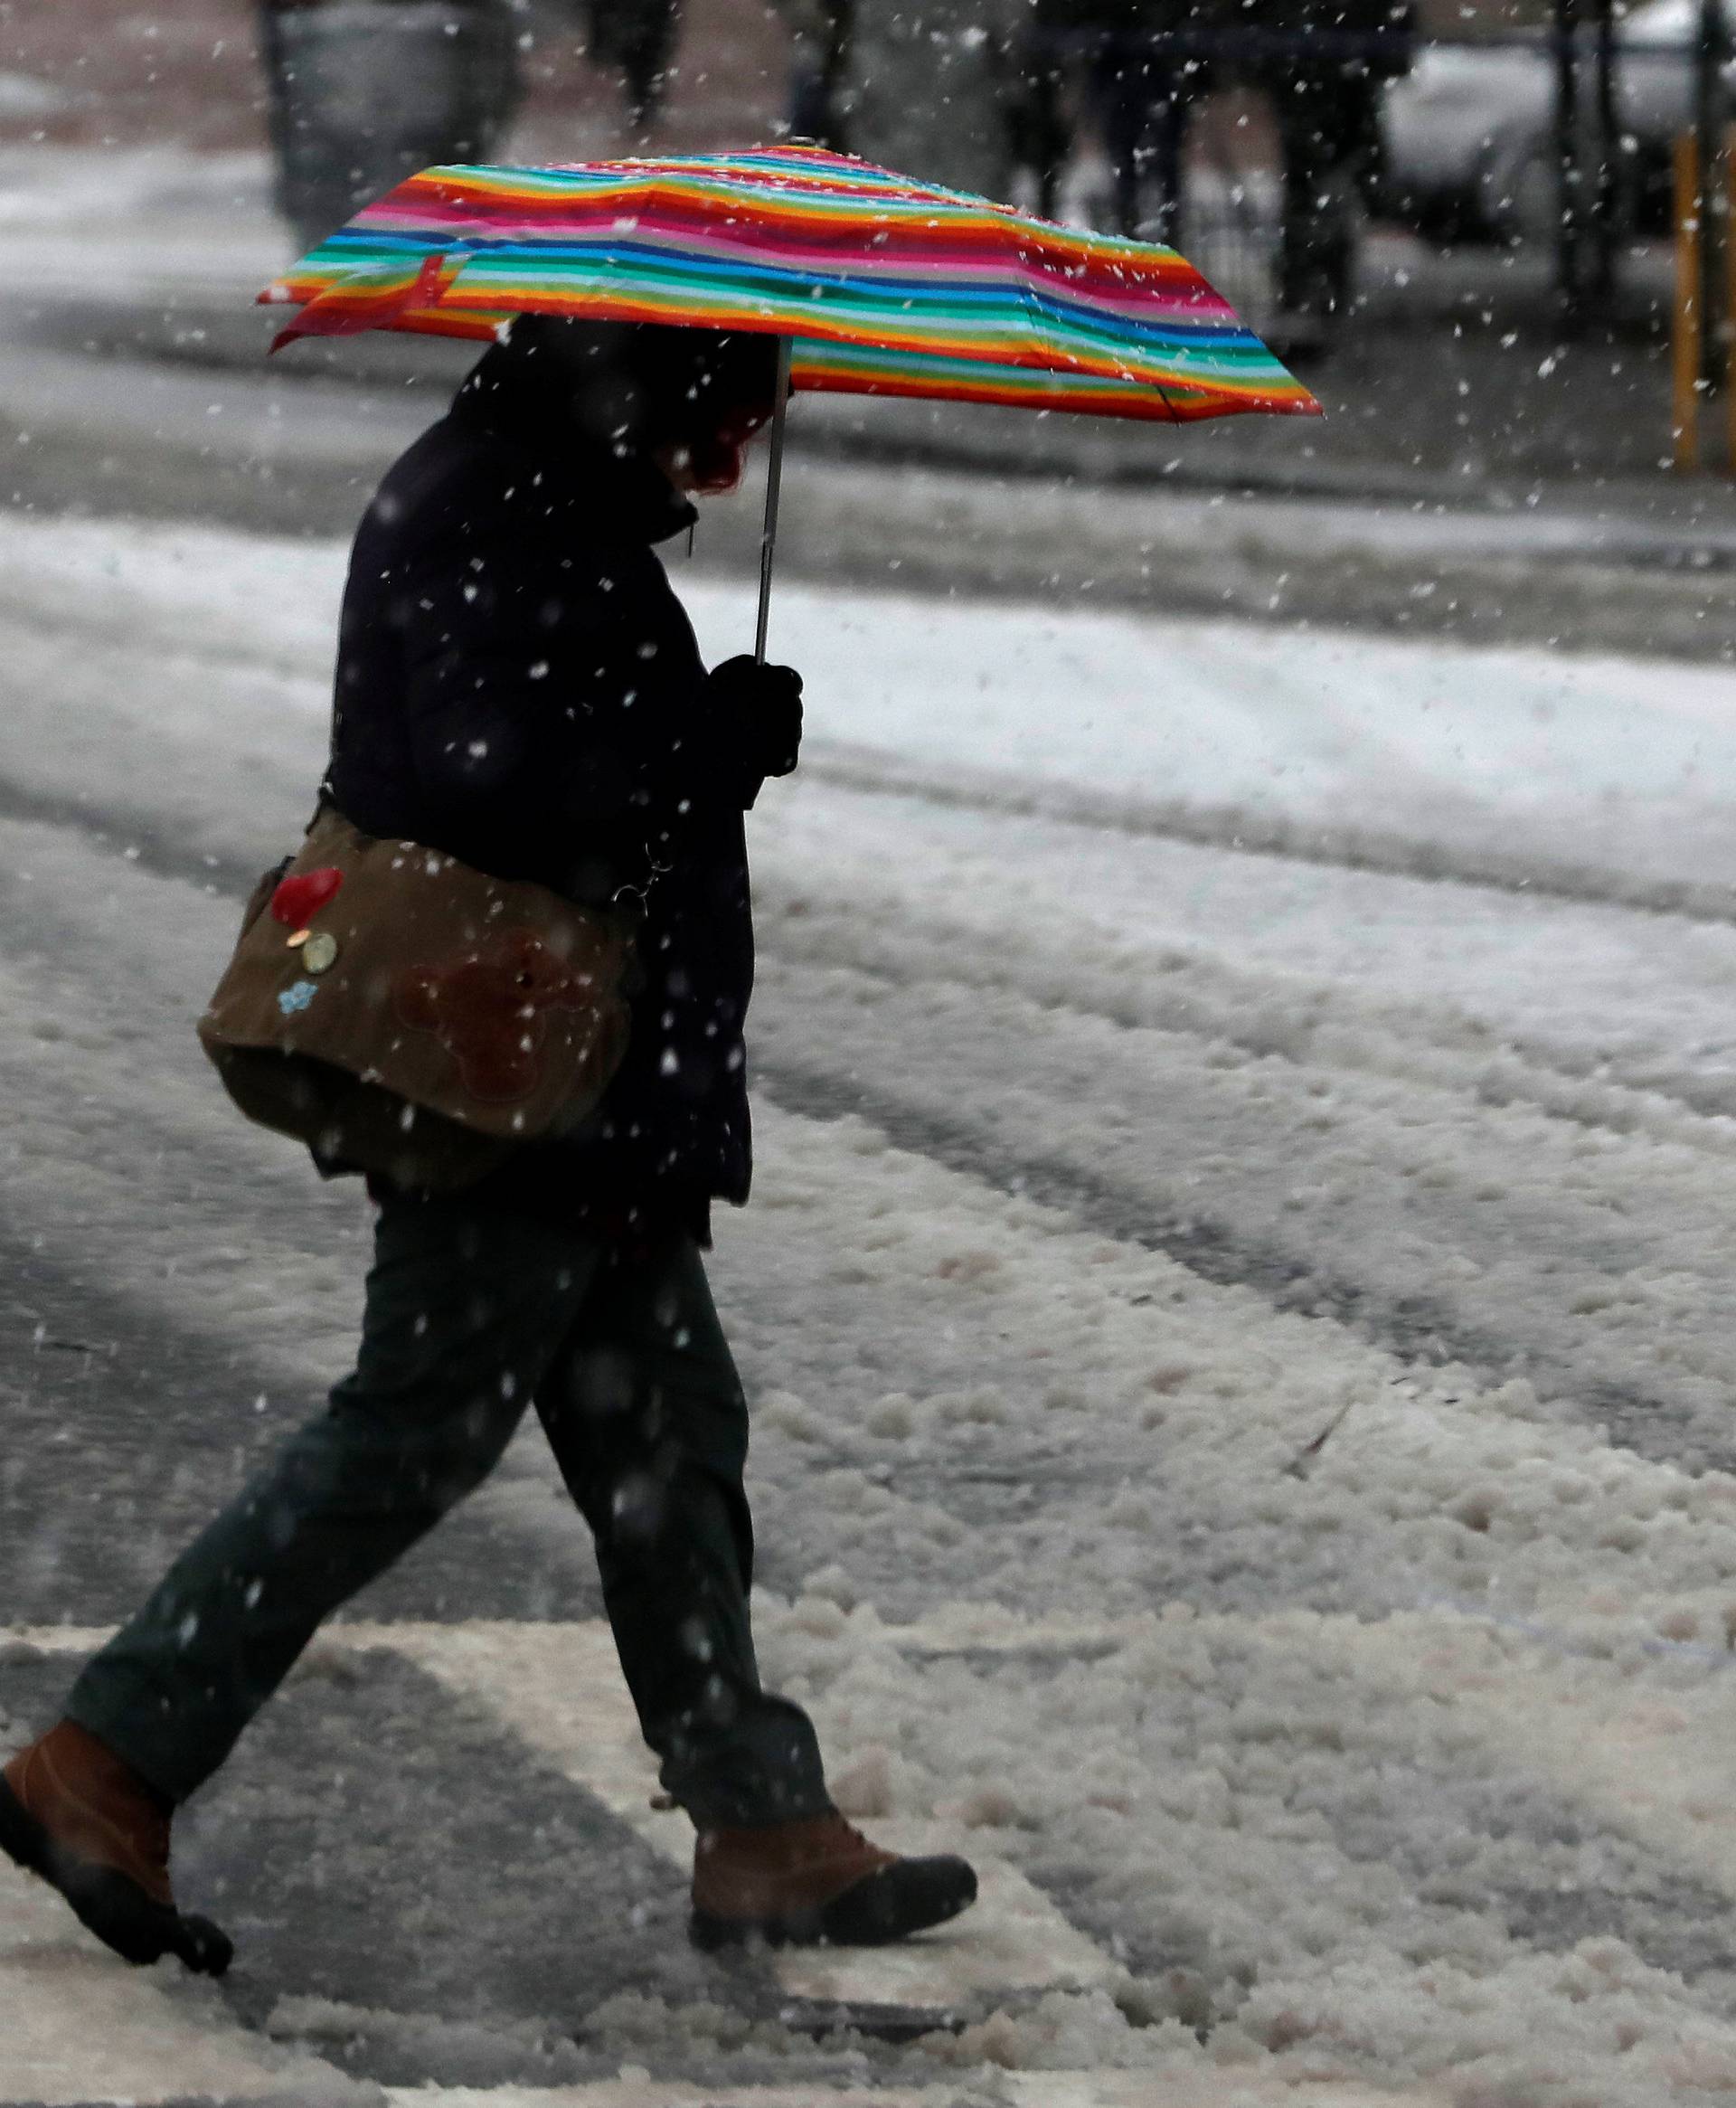 A woman crosses Broadway during a snowstorm in upper Manhattan in New York City